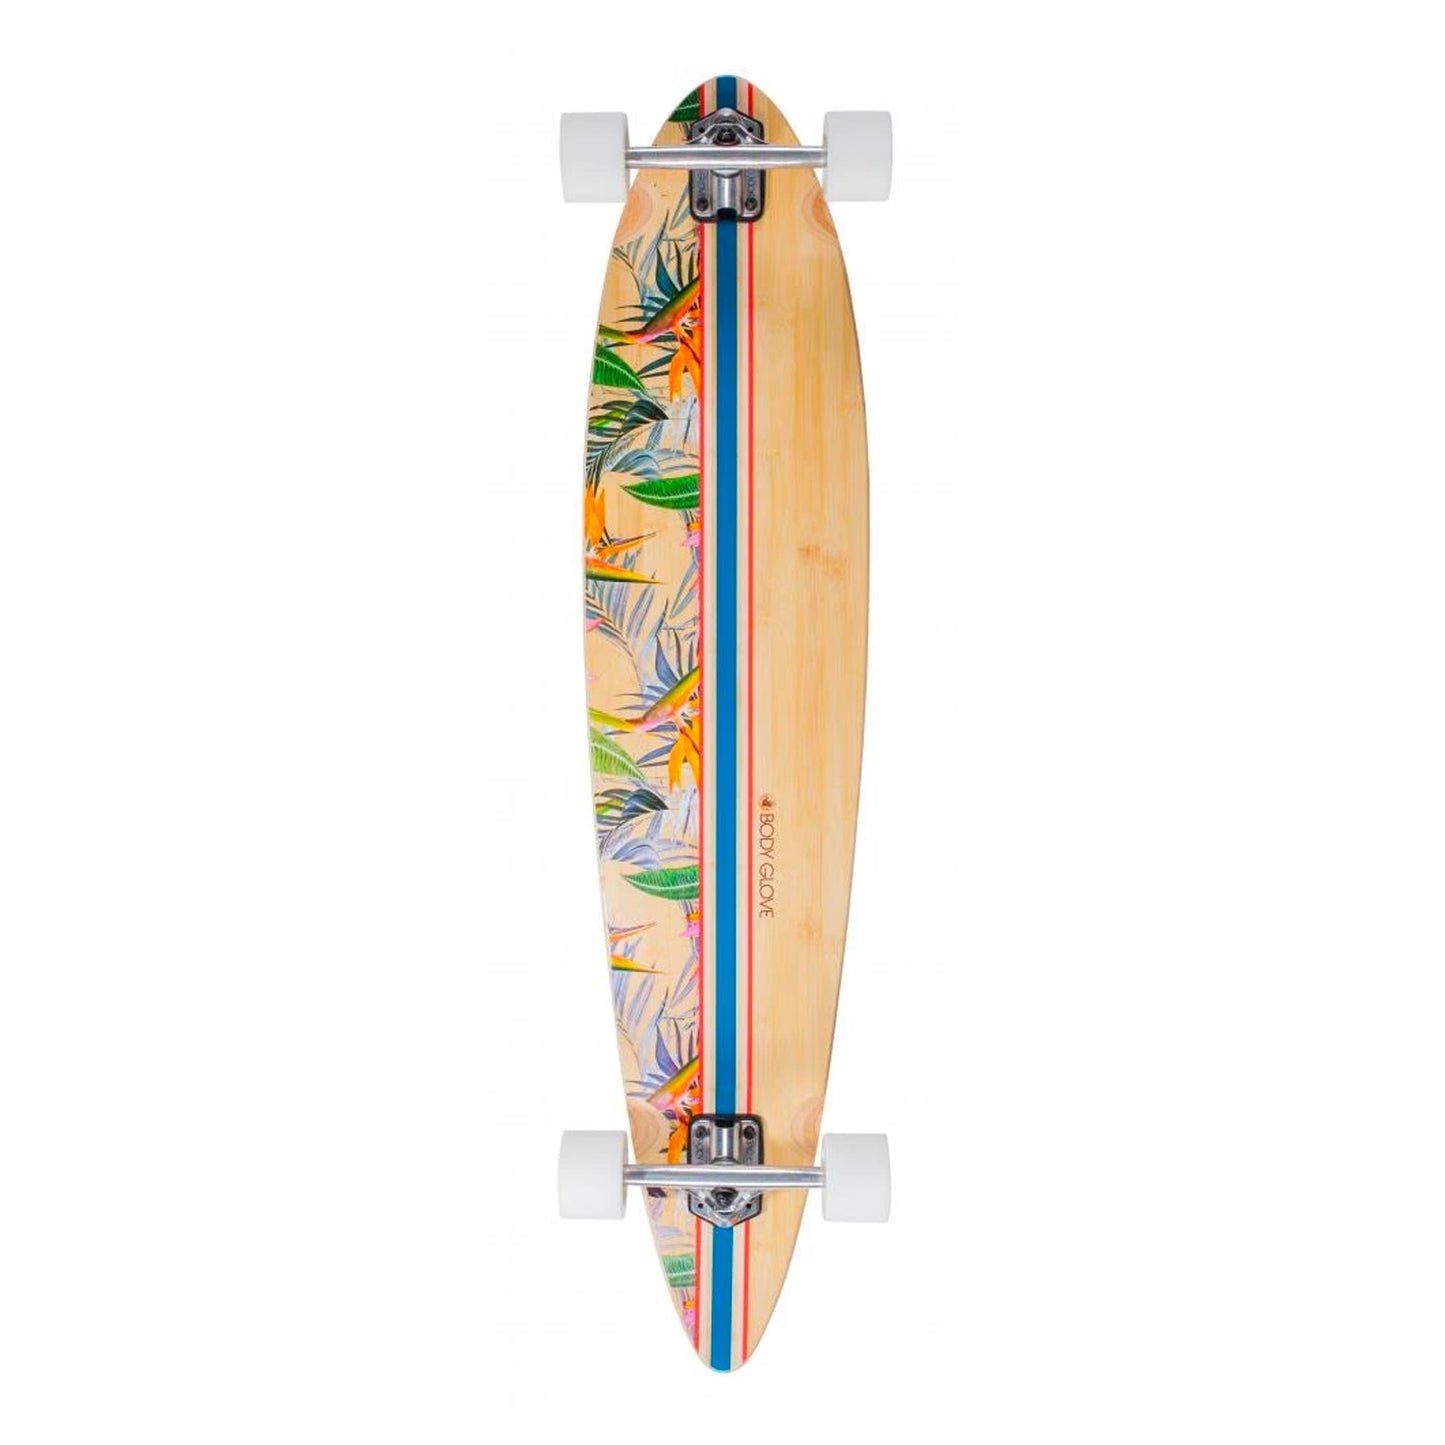 Body Glove Pintail Bamboo Longboard 44"- Natural - Prime Delux Store